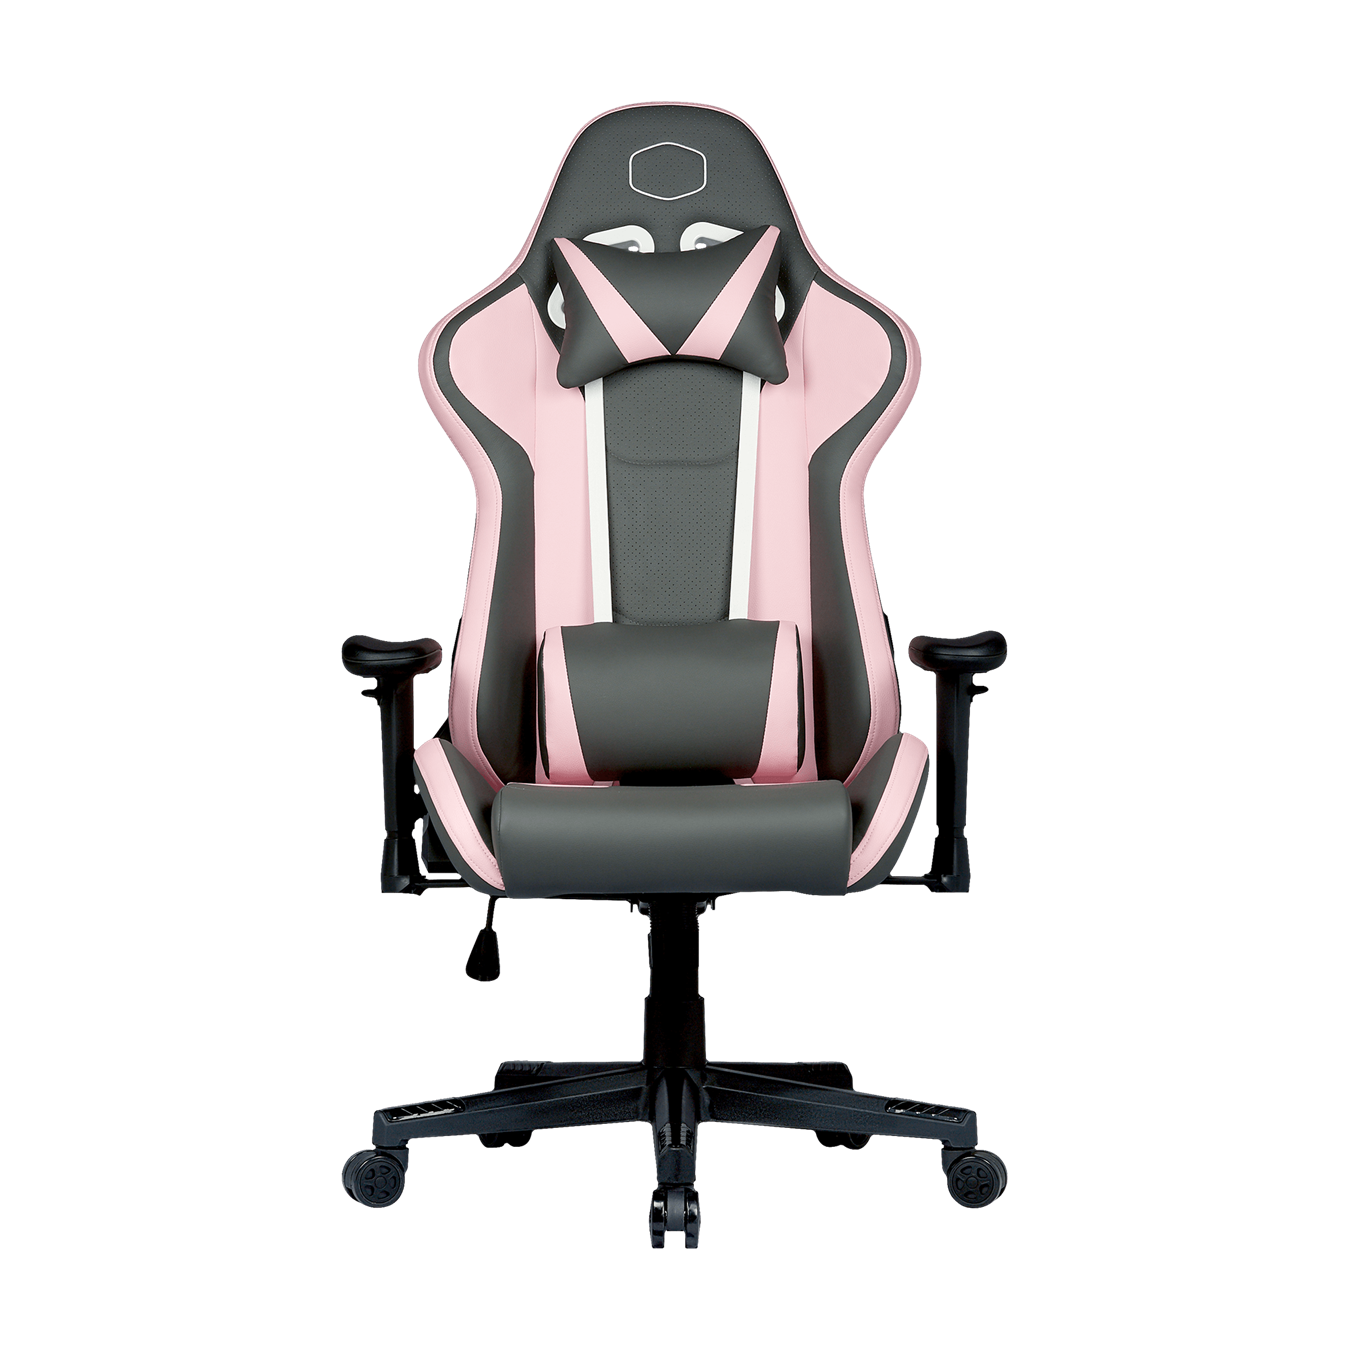 Caliber R1S Rose Grey Edition Gaming Chair - Cooler Master Caliber R1S helps you achieve hard quests while staying dry and comfortable.